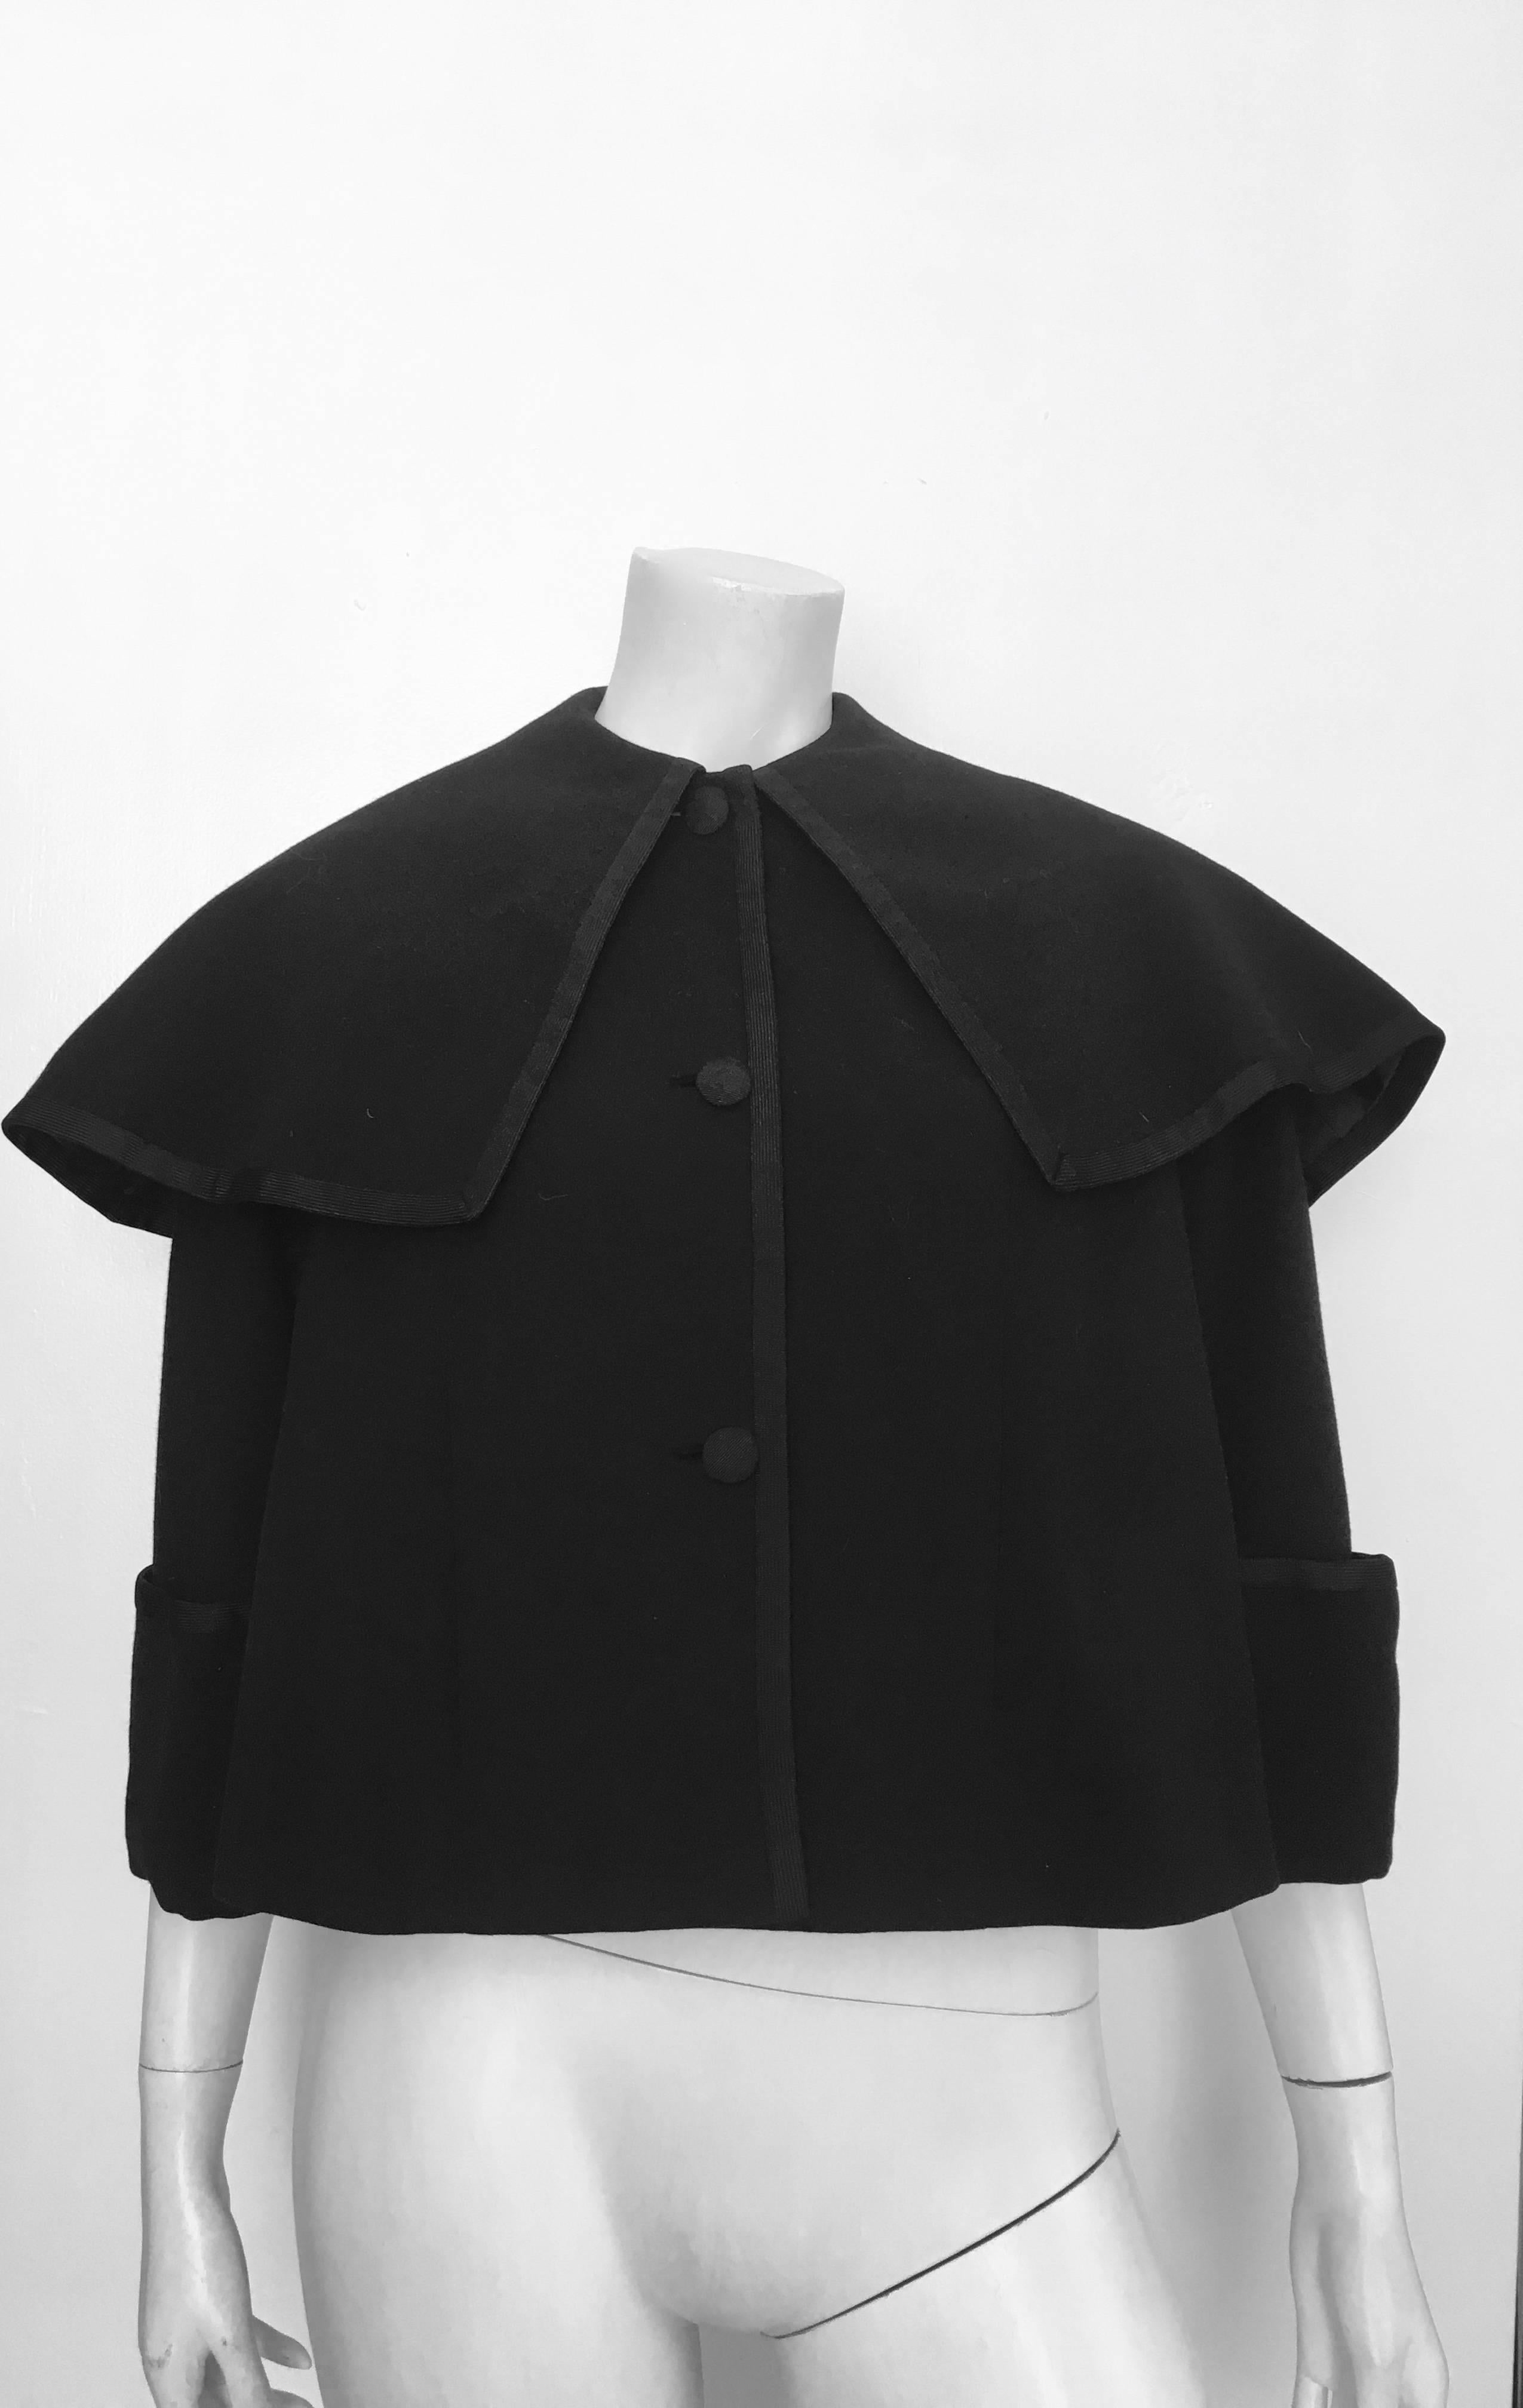 Traina-Norell 1950s Black Wool Cropped Capelet Jacket Size 6 / 8. In Excellent Condition For Sale In Atlanta, GA